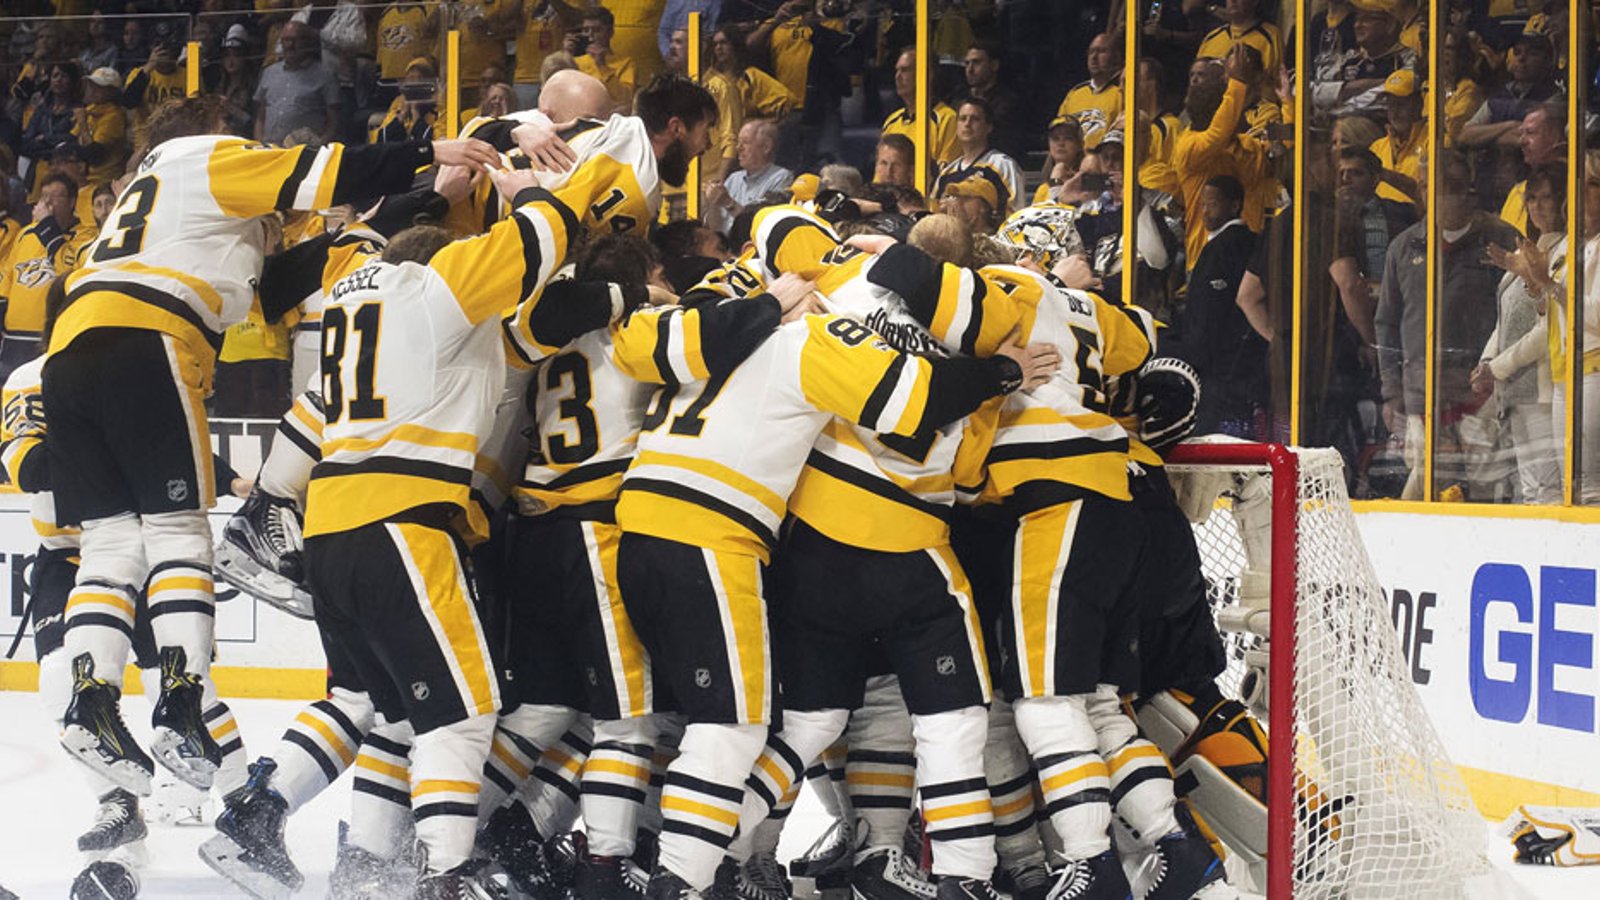 Your call: Will the Penguins three-peat in 2018?